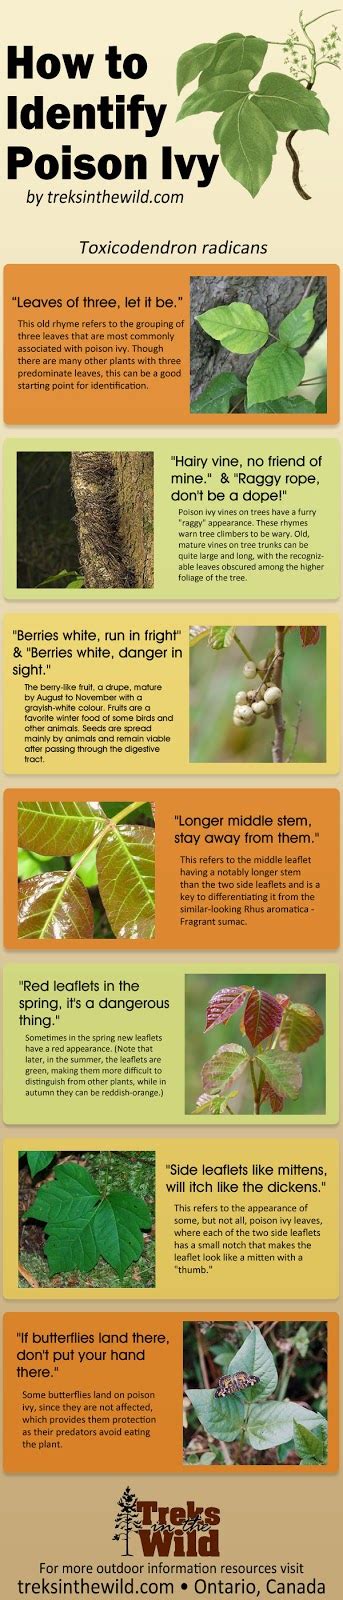 Survival Smarts How To Identify Poison Ivy Infographic